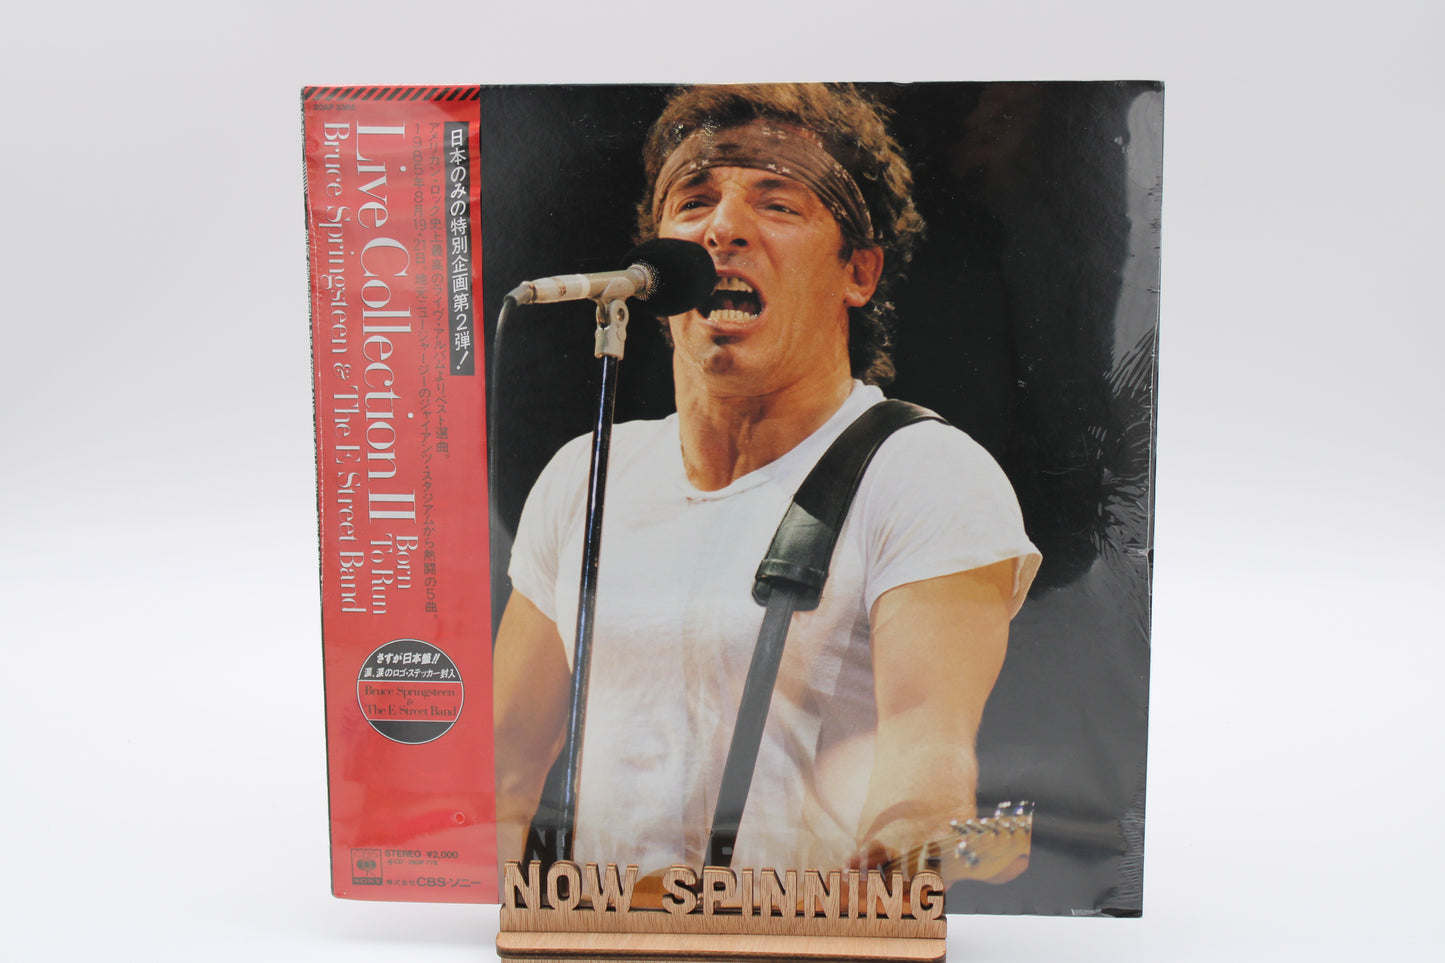 BRUCE SPRINGSTEEN Live Collection II - Born To Run LP Japan/OBI New Vinyl Sealed